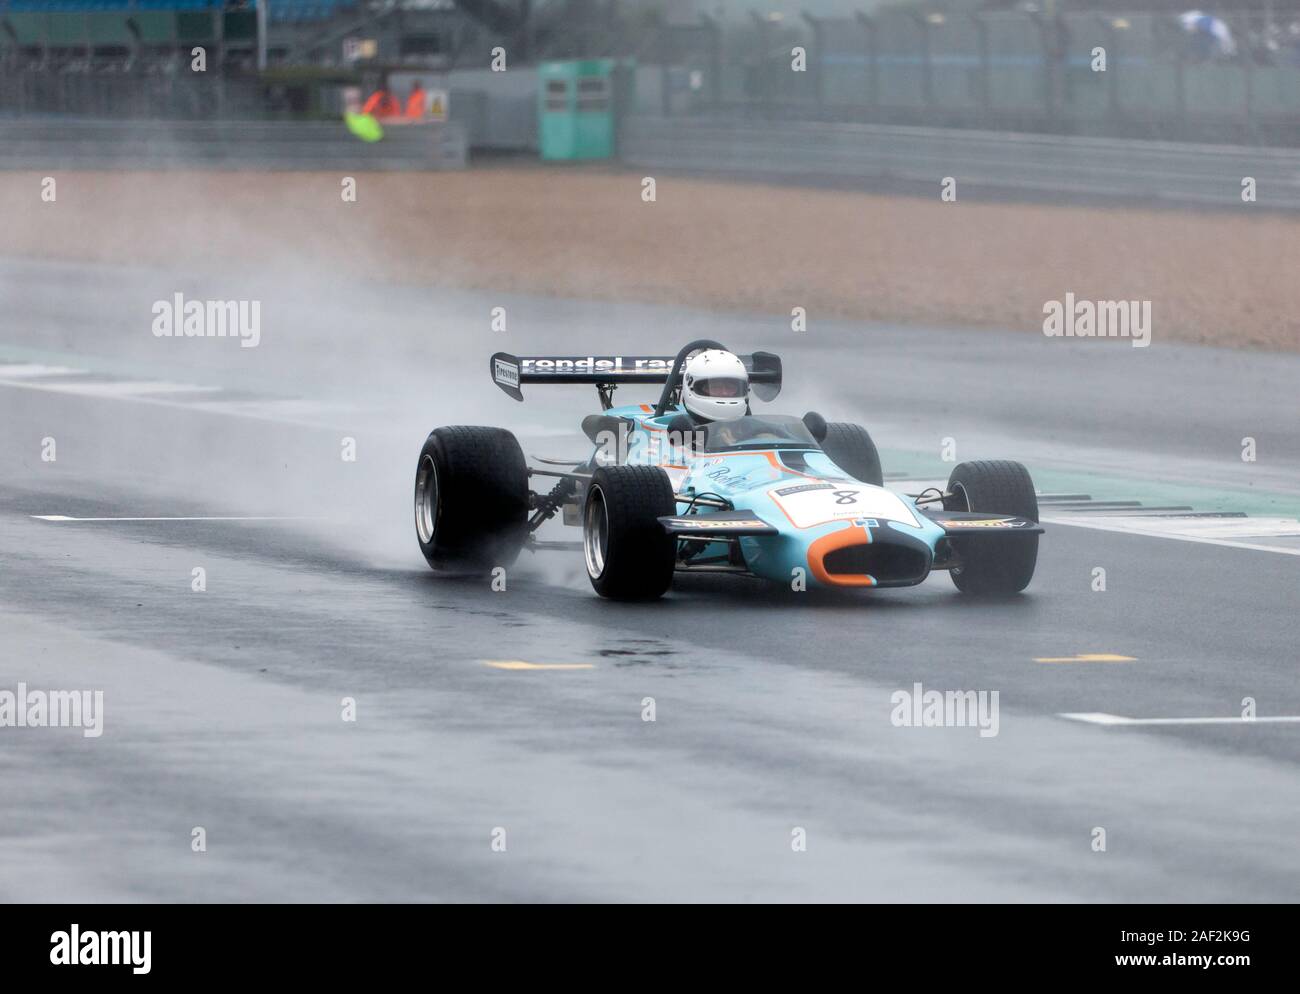 https://c8.alamy.com/comp/2AF2K9G/klaus-berg-driving-his-1971-bluebrabham-bt36-in-the-rain-during-the-hscc-historic-formula-2-race-67-78-at-the-2019-silverstone-classic-2AF2K9G.jpg